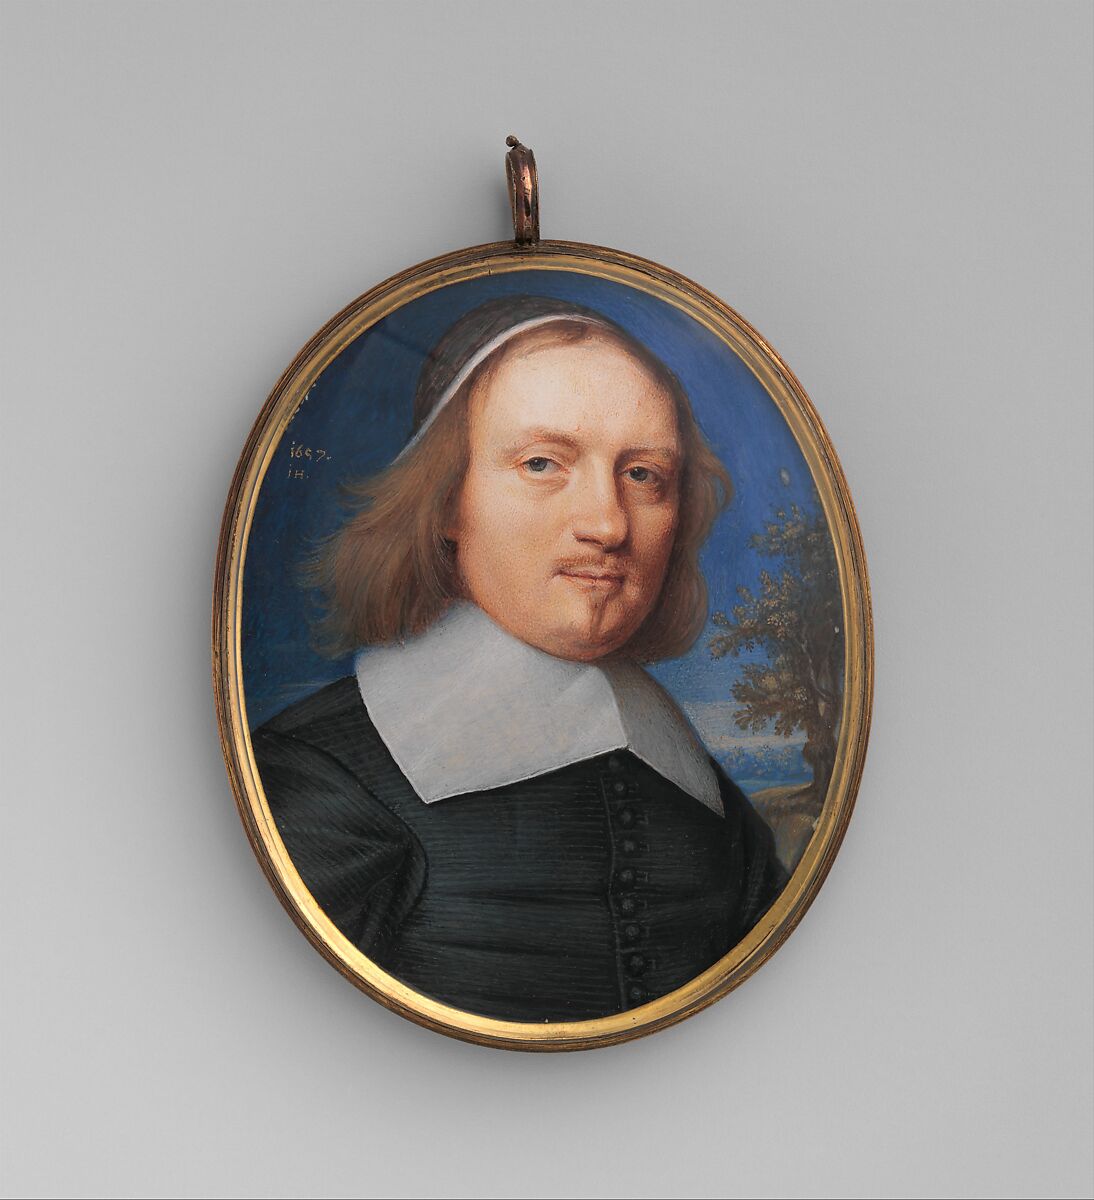 Dr. Brian Walton (born about 1600, died 1661), John Hoskins (British, active by ca. 1615–died 1665), Vellum laid on card 